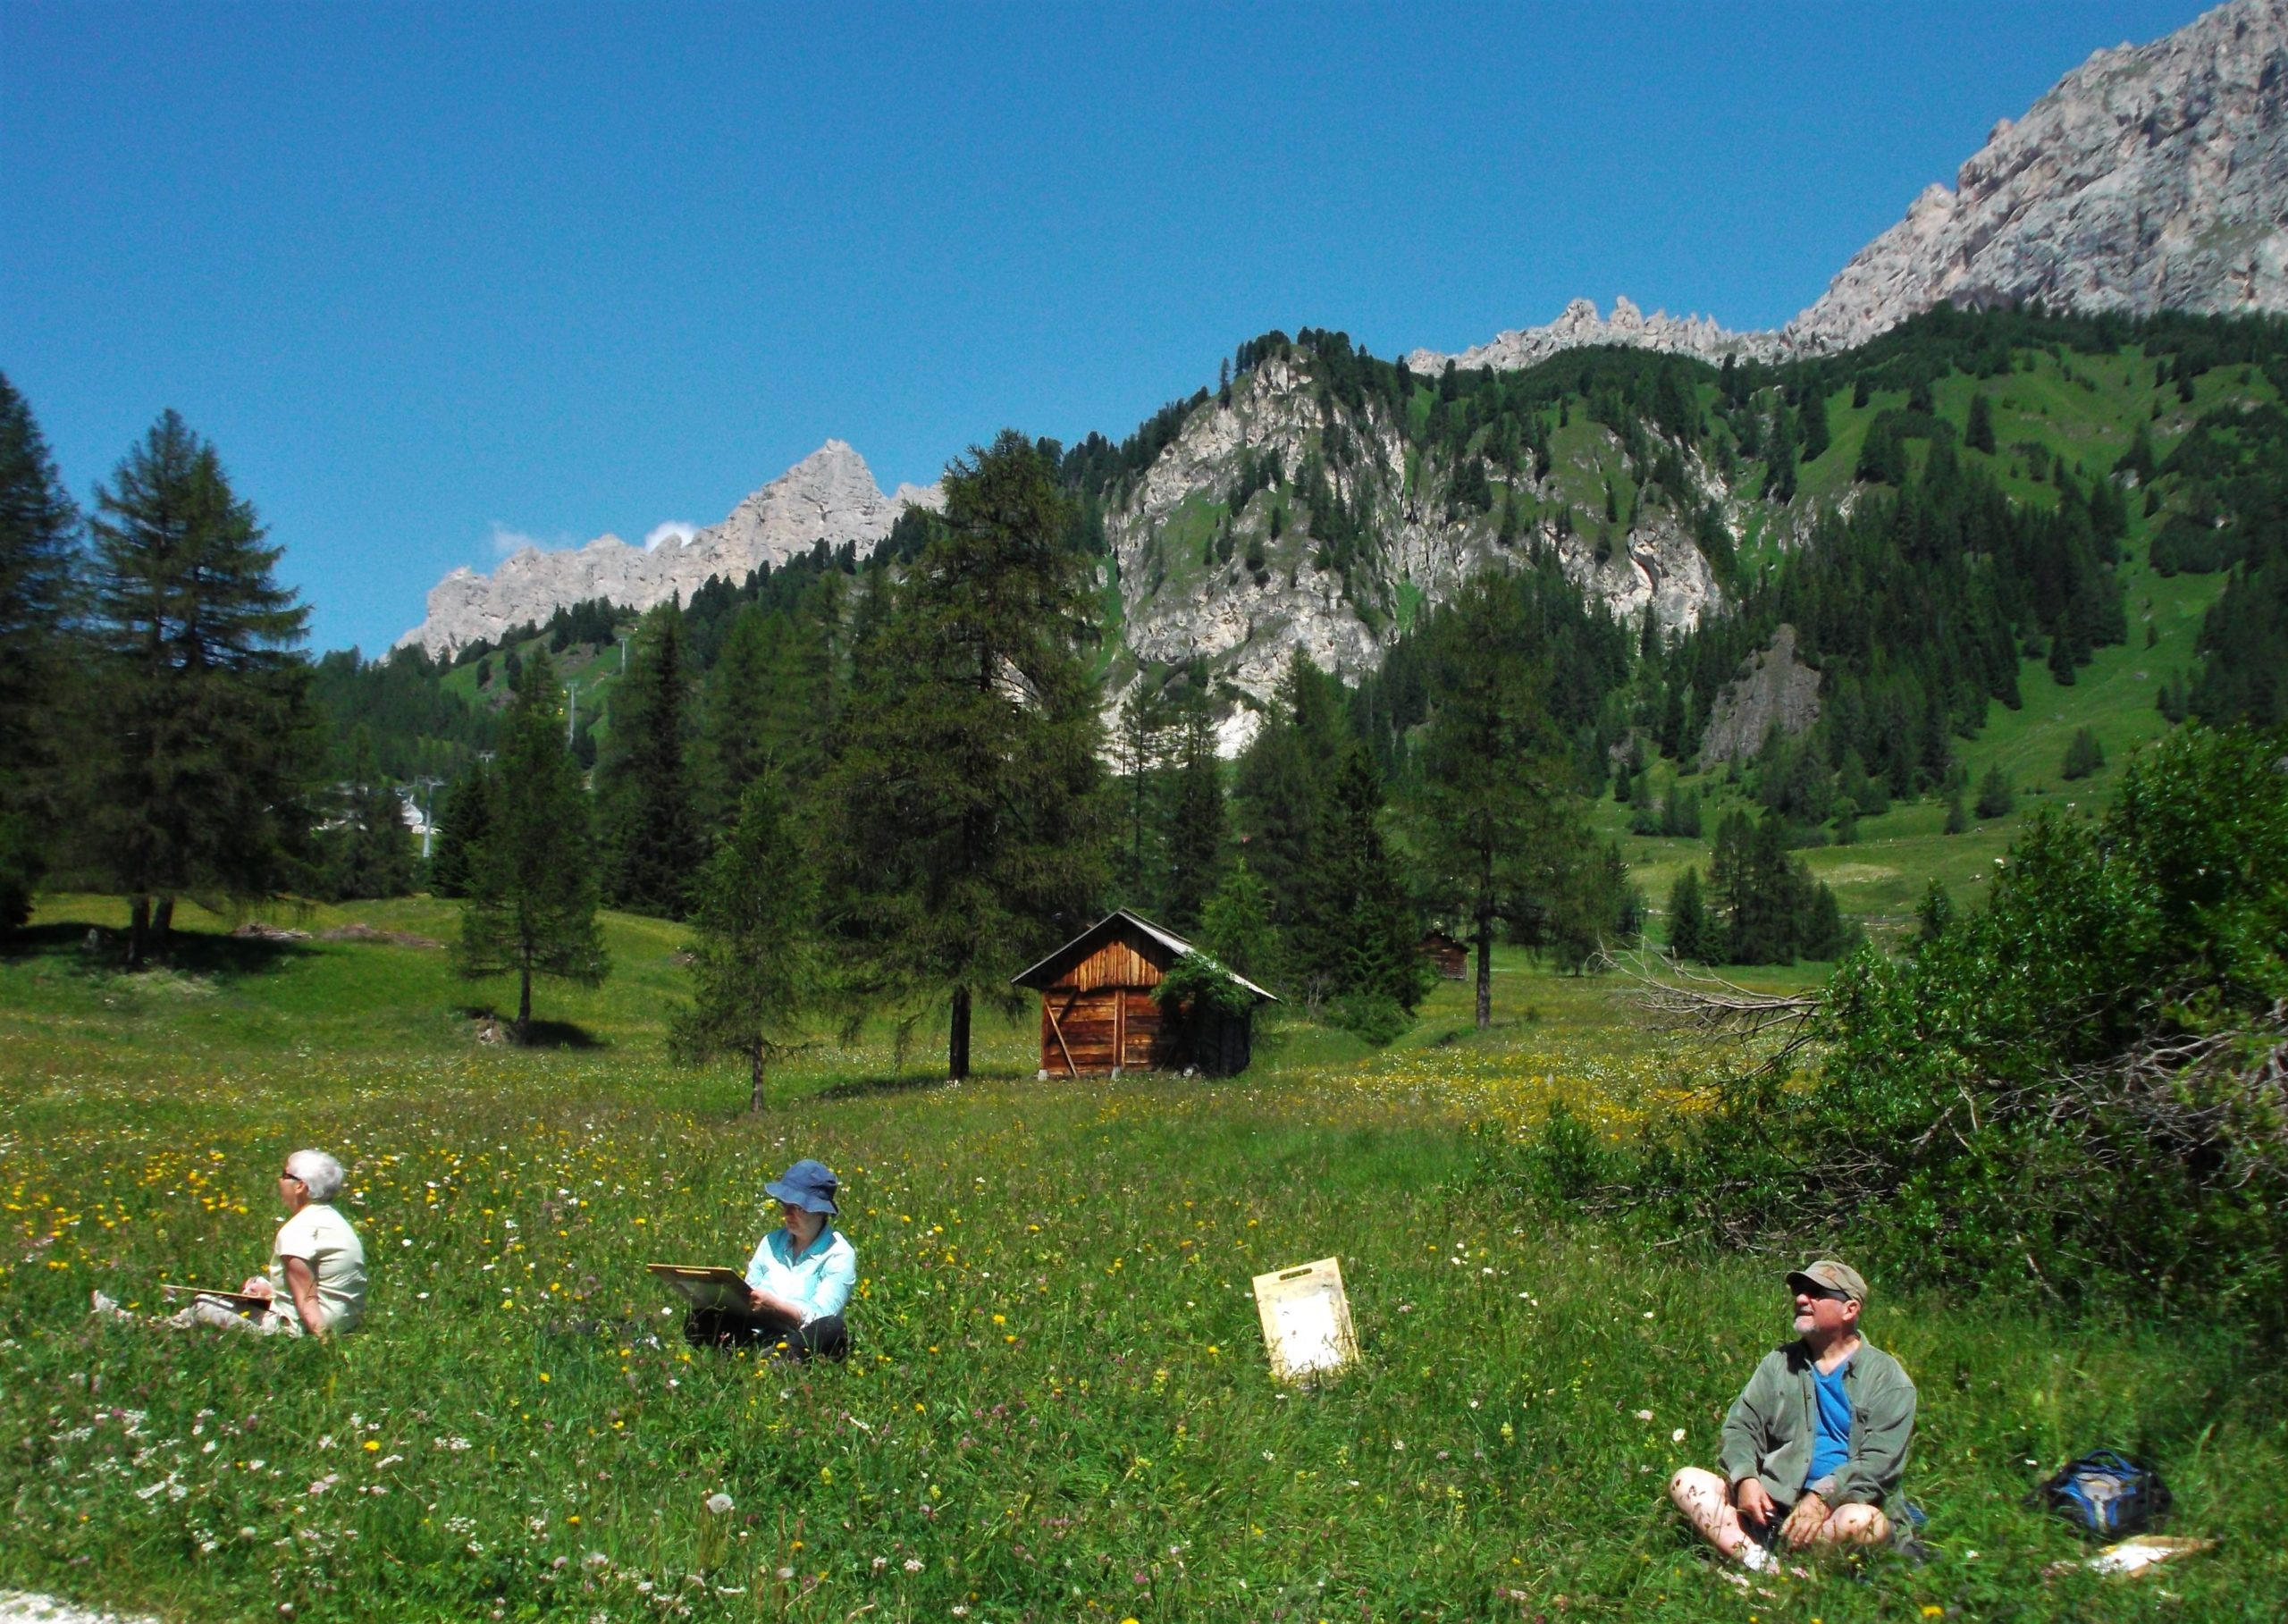 Paintin group in the Dolomites